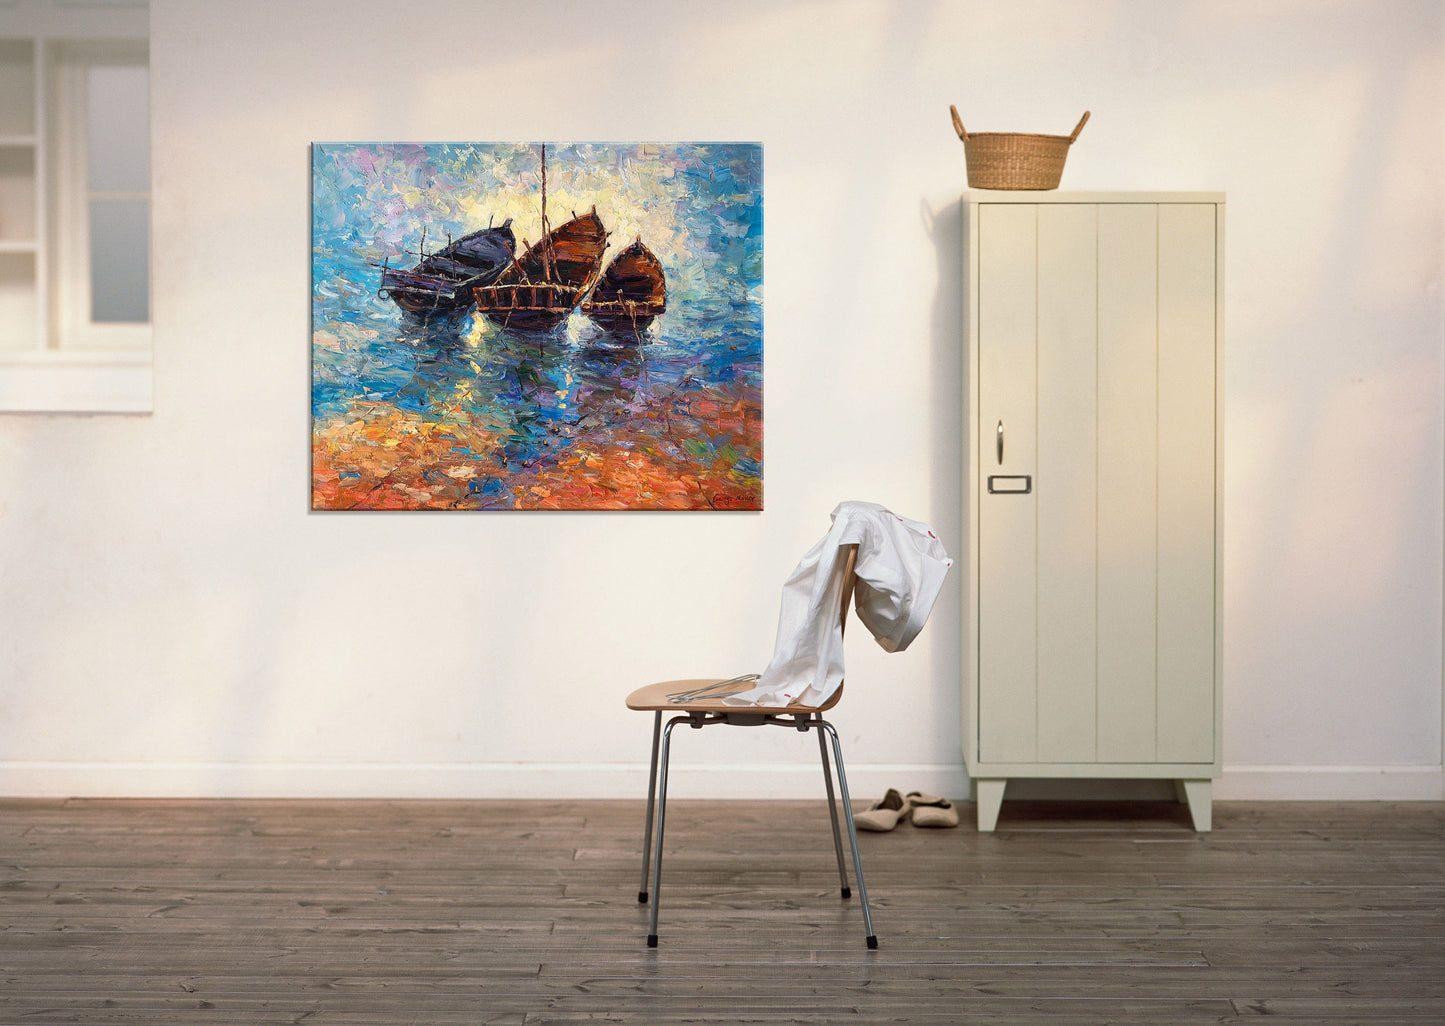 Oil Painting Abstract, Seascape Painting, Canvas Art, Abstract Wall Art, Original Abstract Art, Large Canvas Art, Fishing Boats Painting